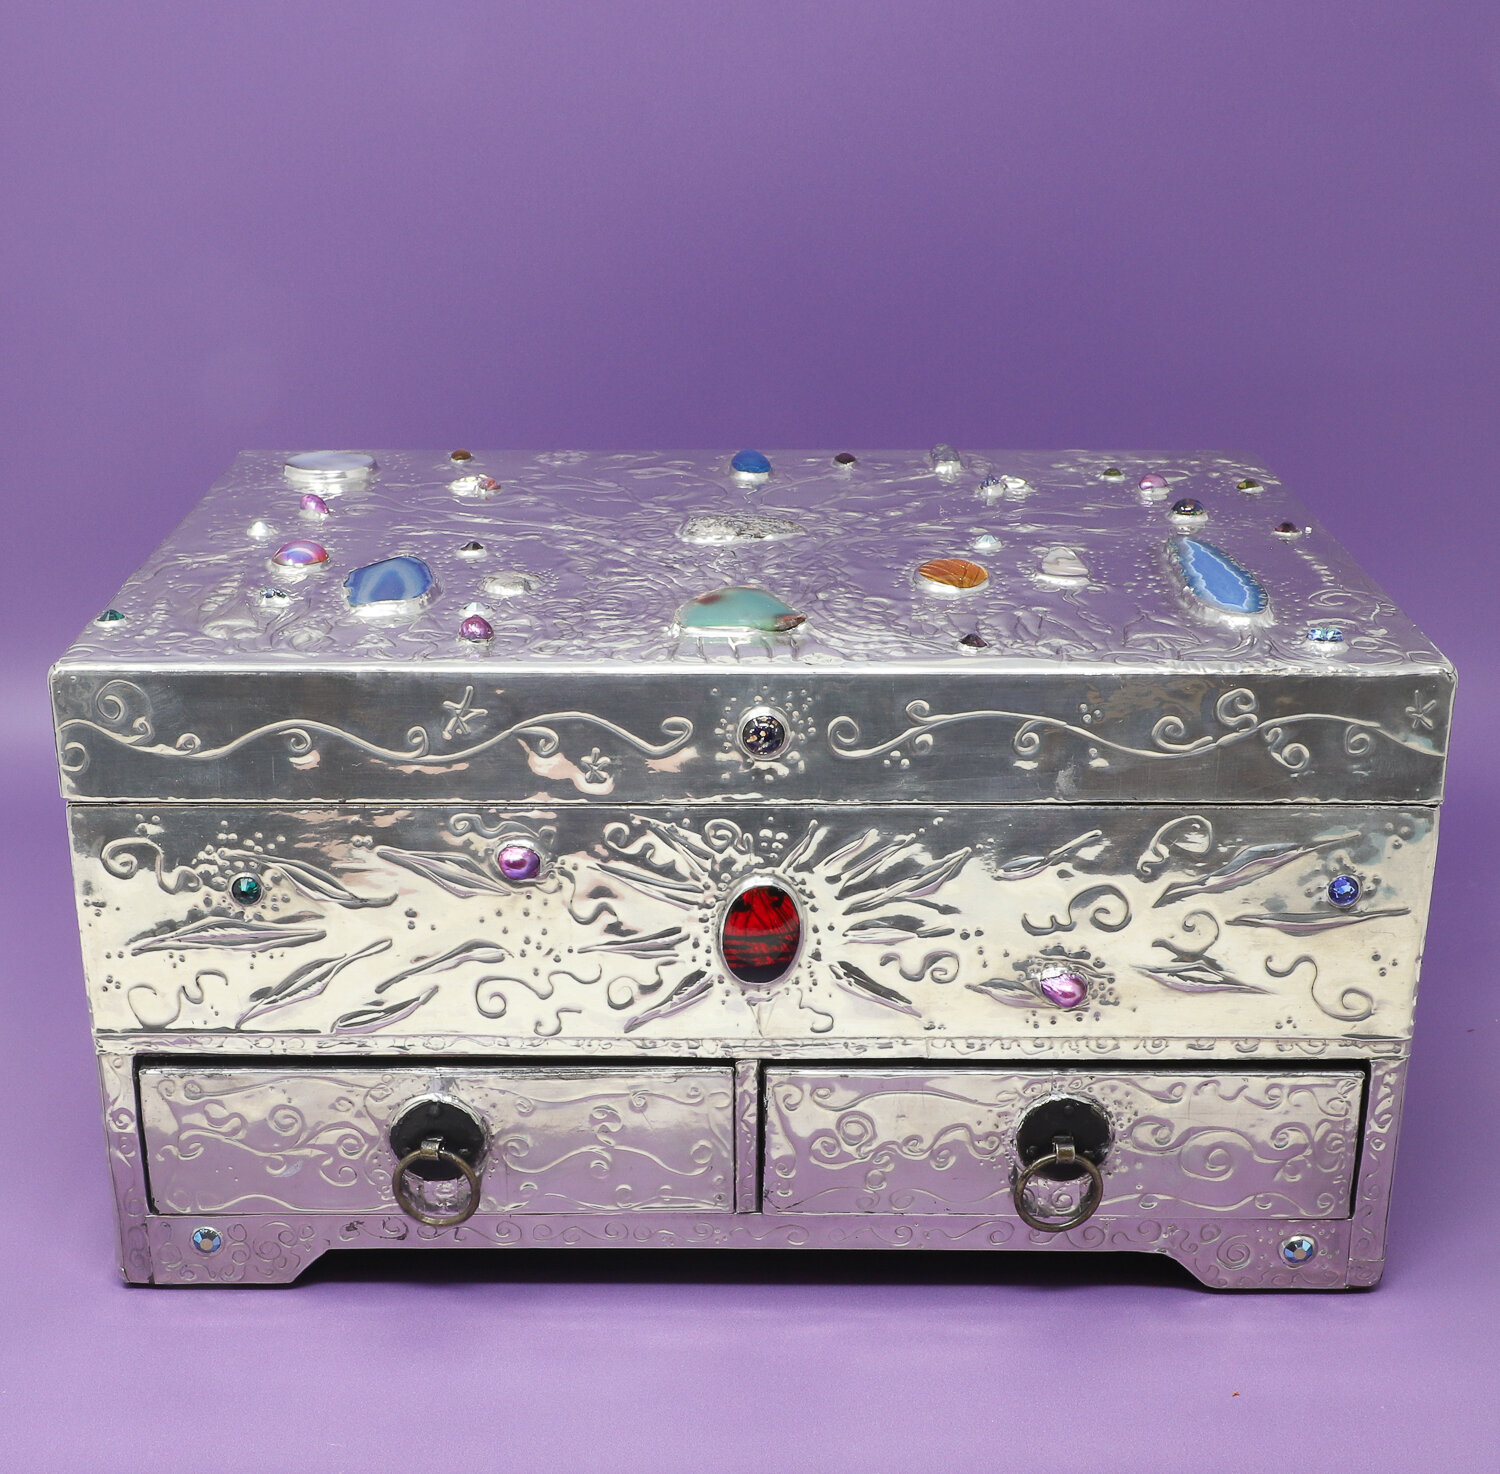 Apothecary Box - £1000.00 - available to purchase